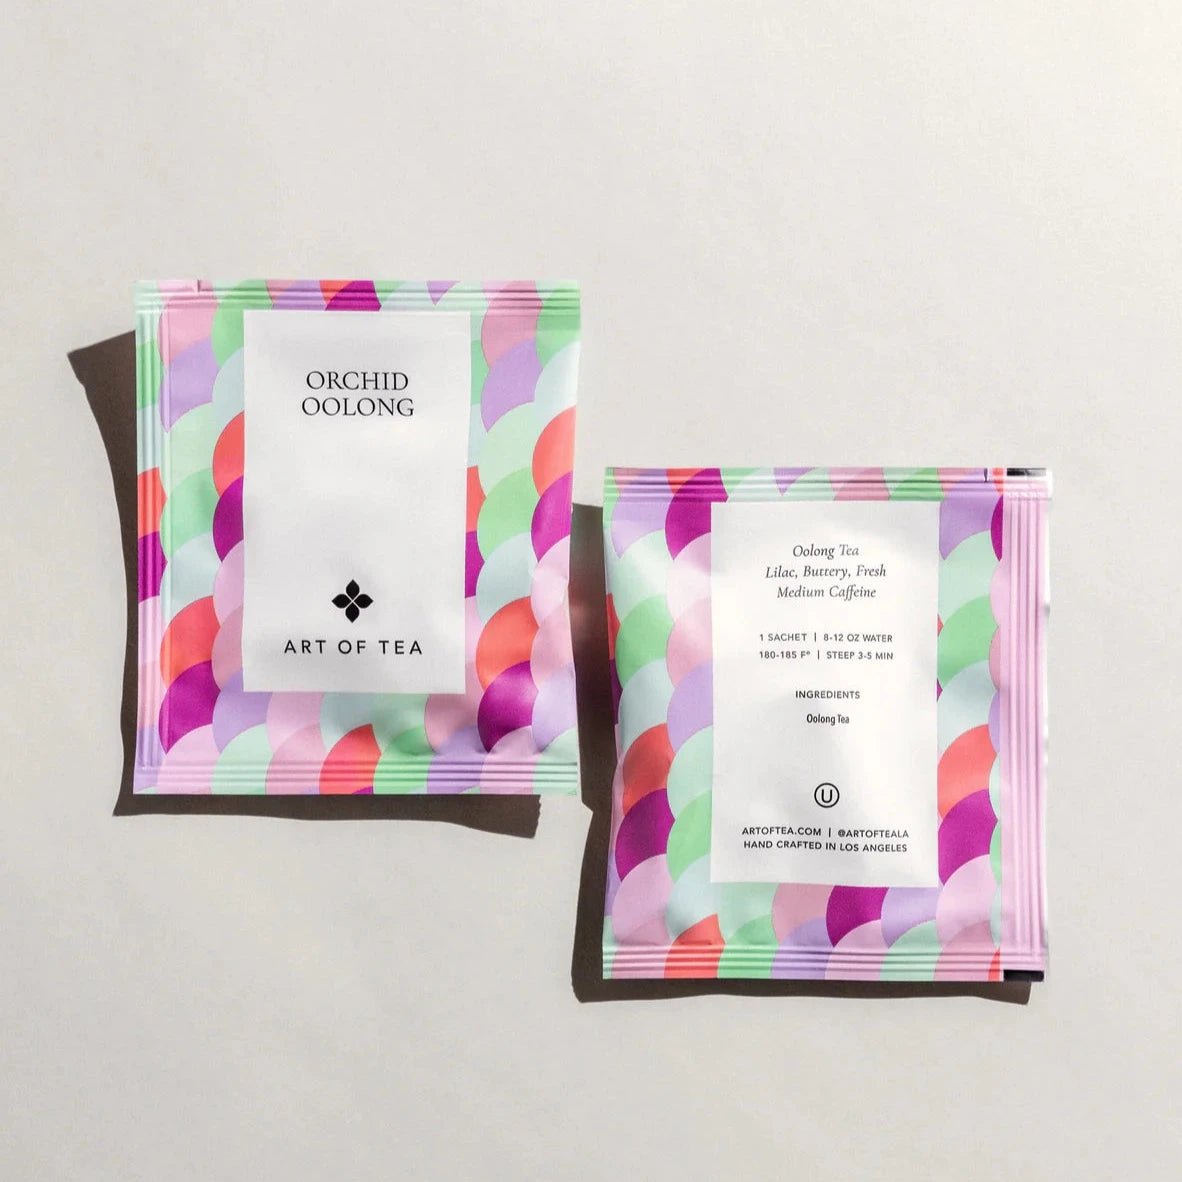 pastel colored tea sachet with. varies hues of purple, blue & green